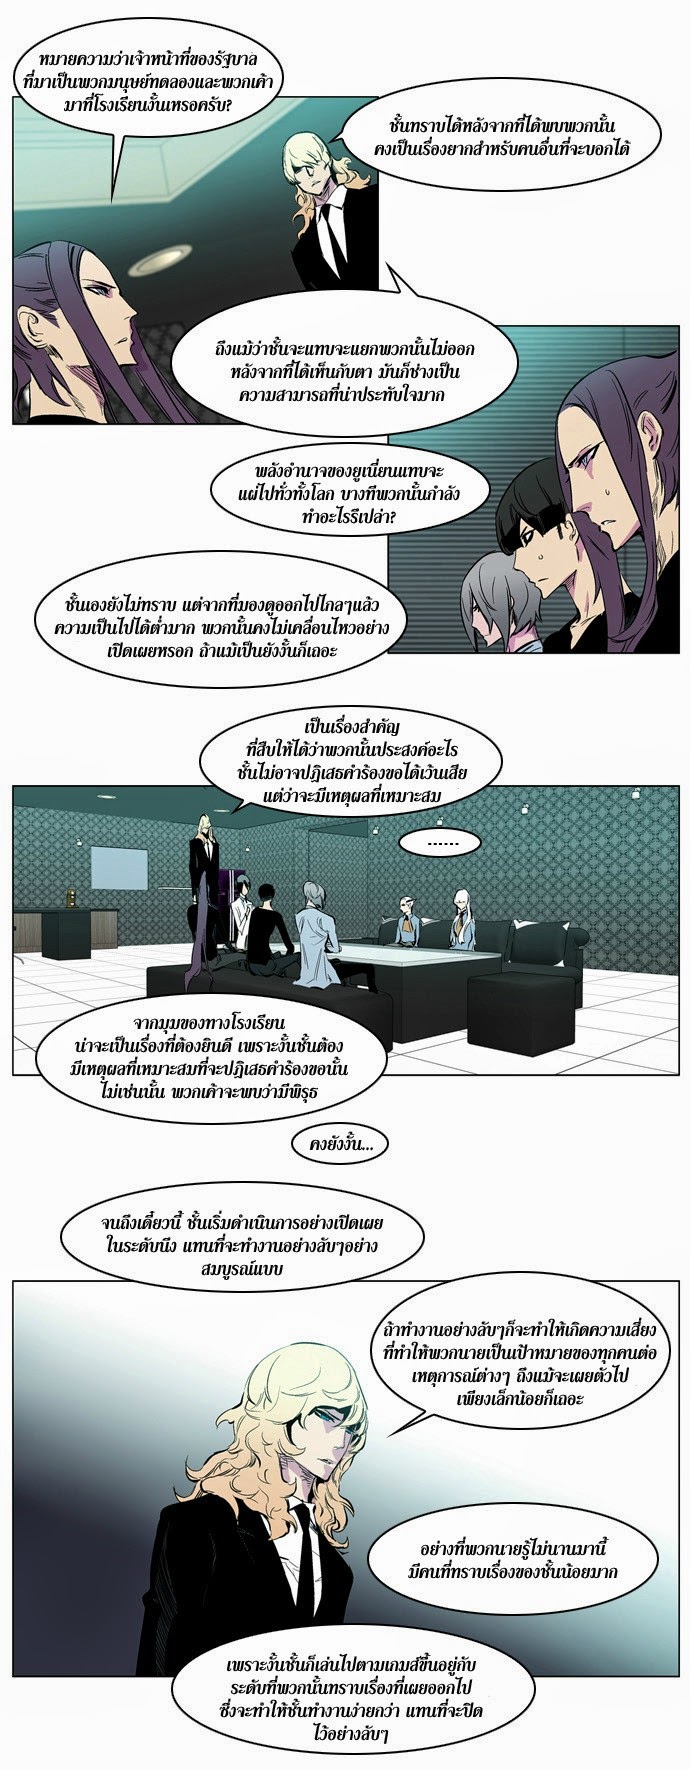 Noblesse 205 015